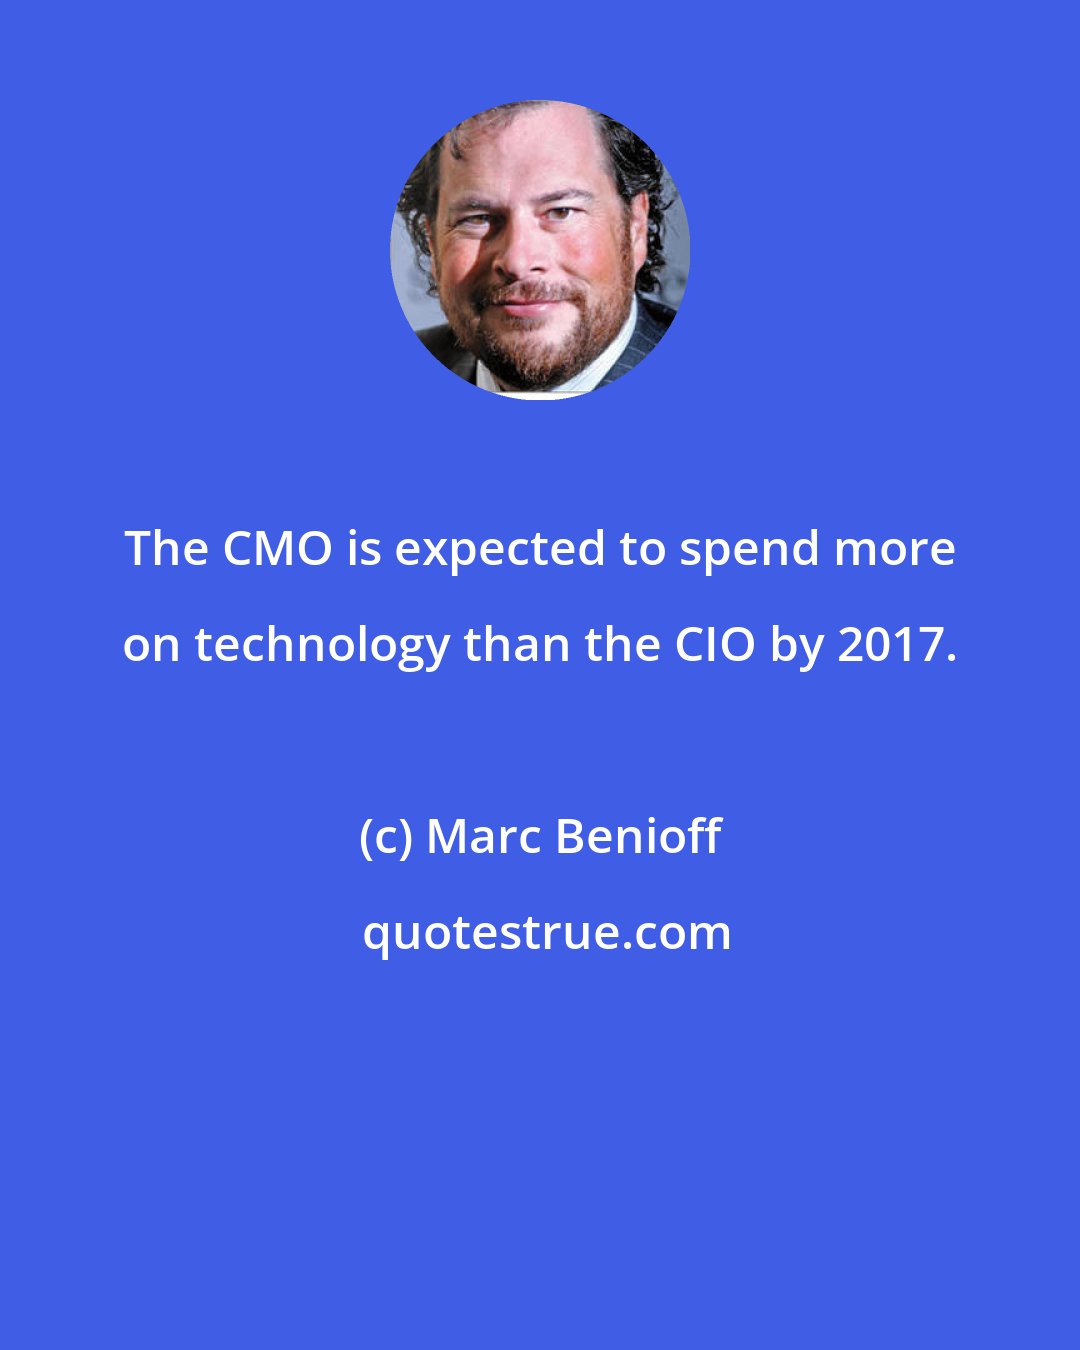 Marc Benioff: The CMO is expected to spend more on technology than the CIO by 2017.